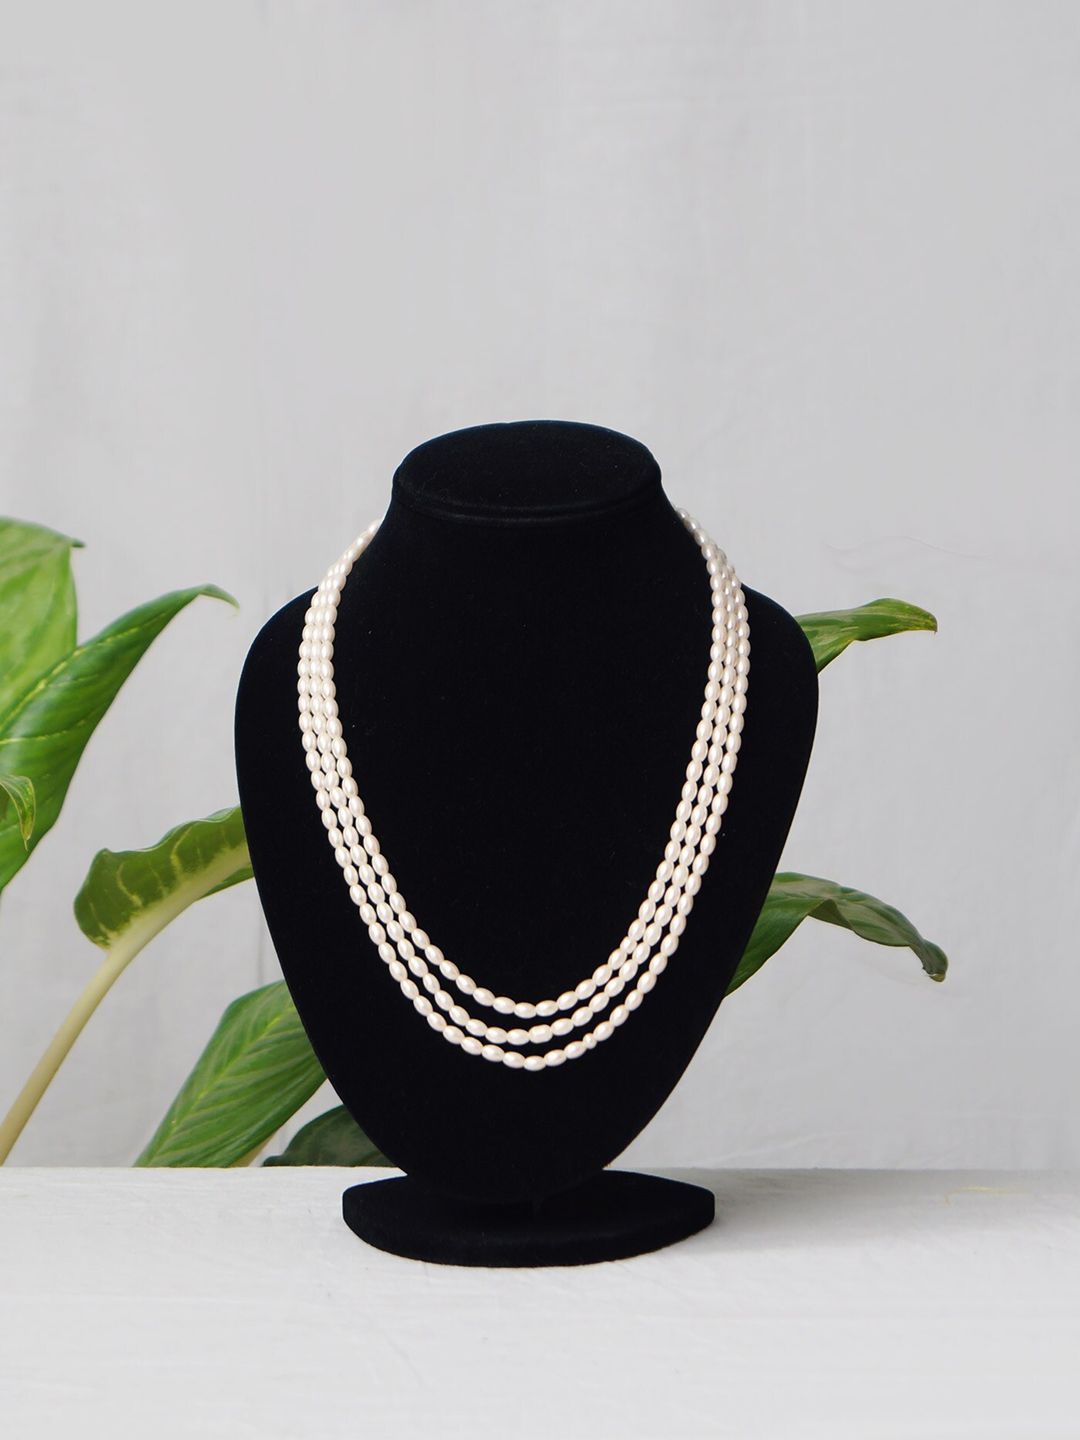 Unnati Silks White Gold-Plated Amravati Oval Pearls Beads Layered Necklace Price in India